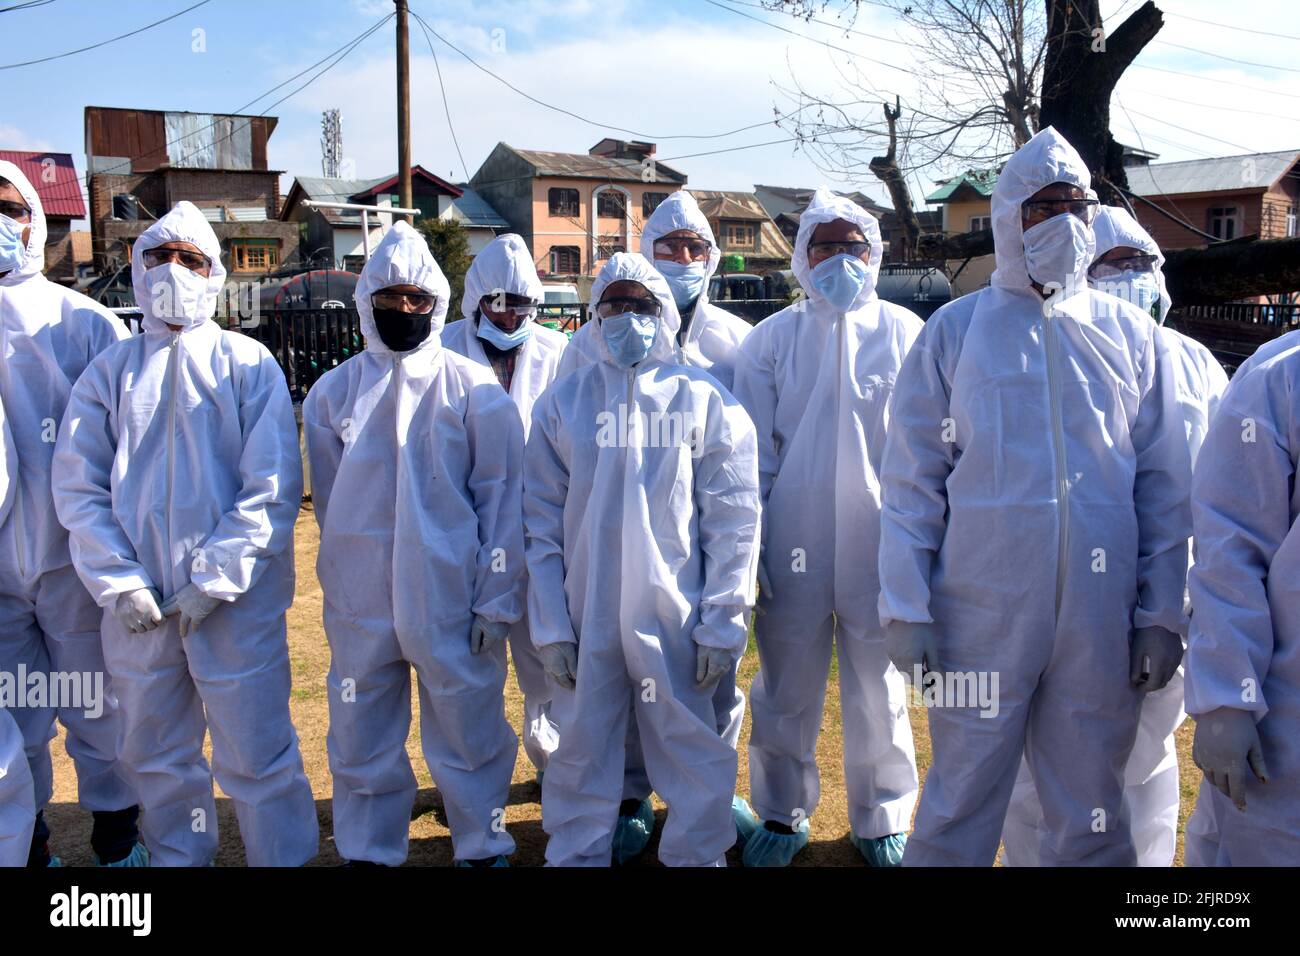 Srinagar, Jammu and kashmir India 07 August 2020. White Kit wearing frontline men warriors are in a single line and ready to fight against coronavirus Stock Photo